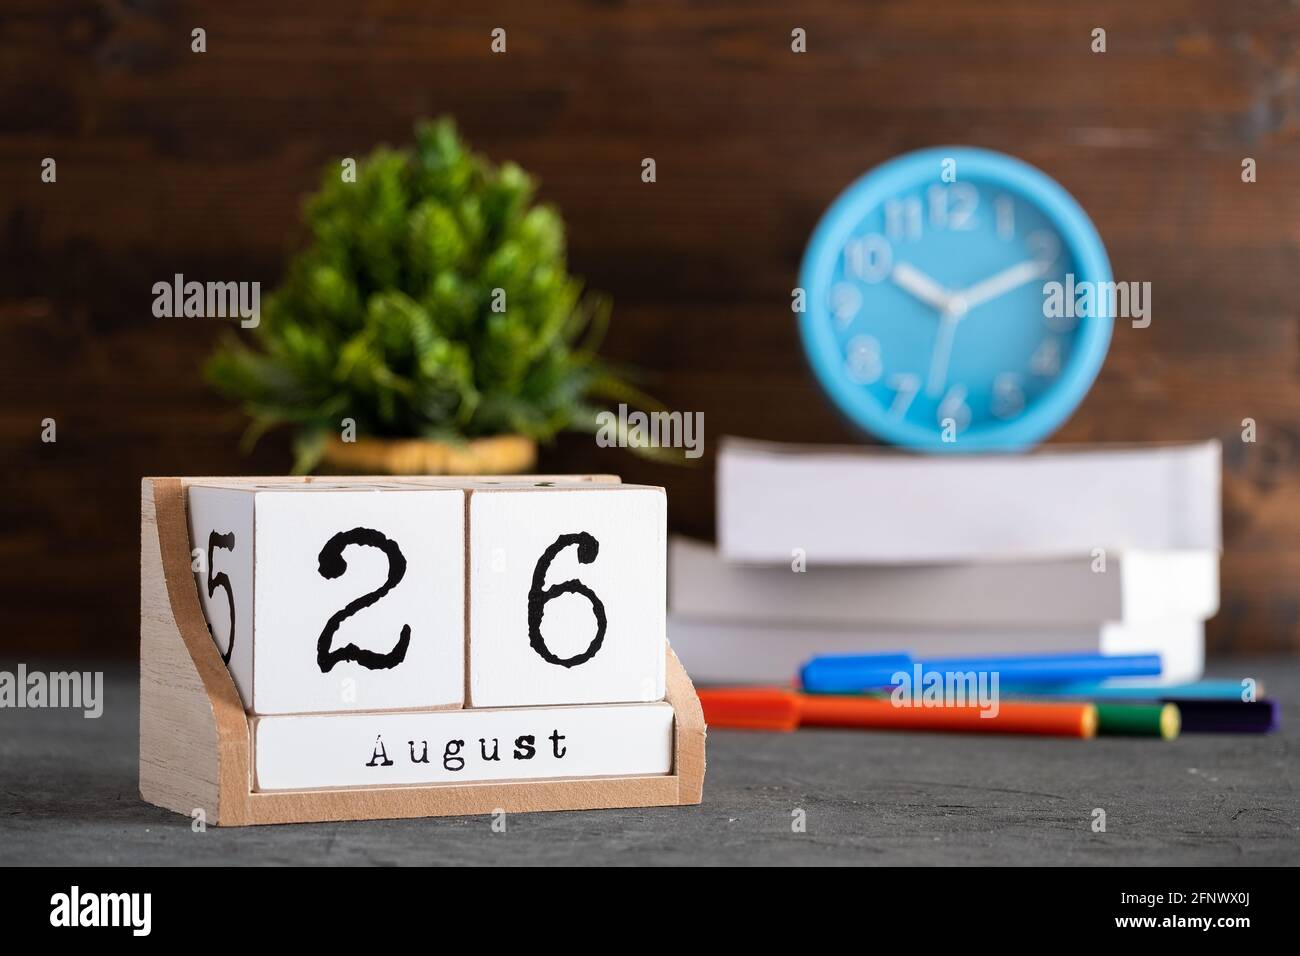 August 26th. August 26 wooden cube calendar with blur objects on background. Stock Photo